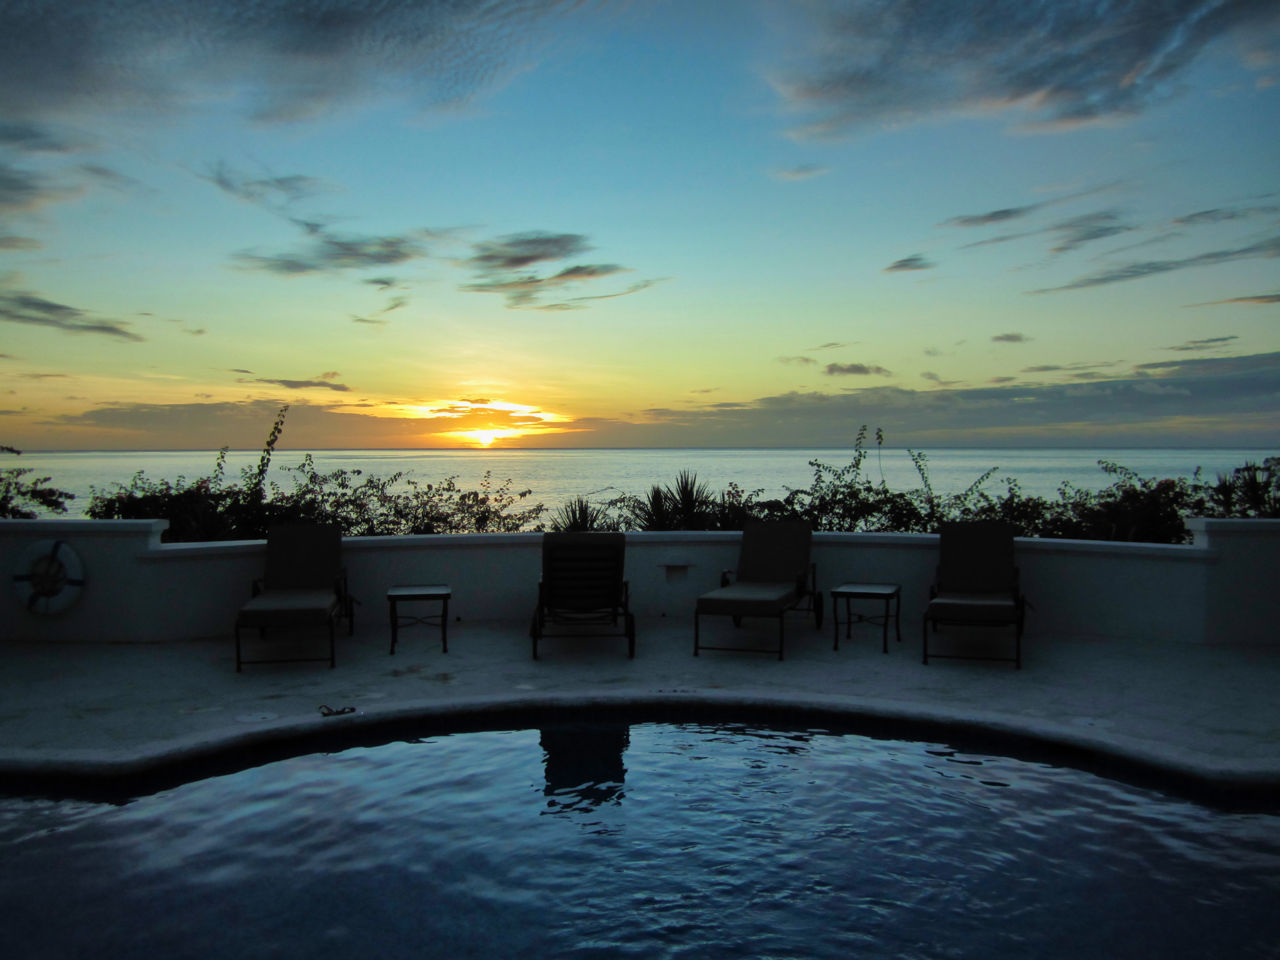 Sunset over the villa's pool